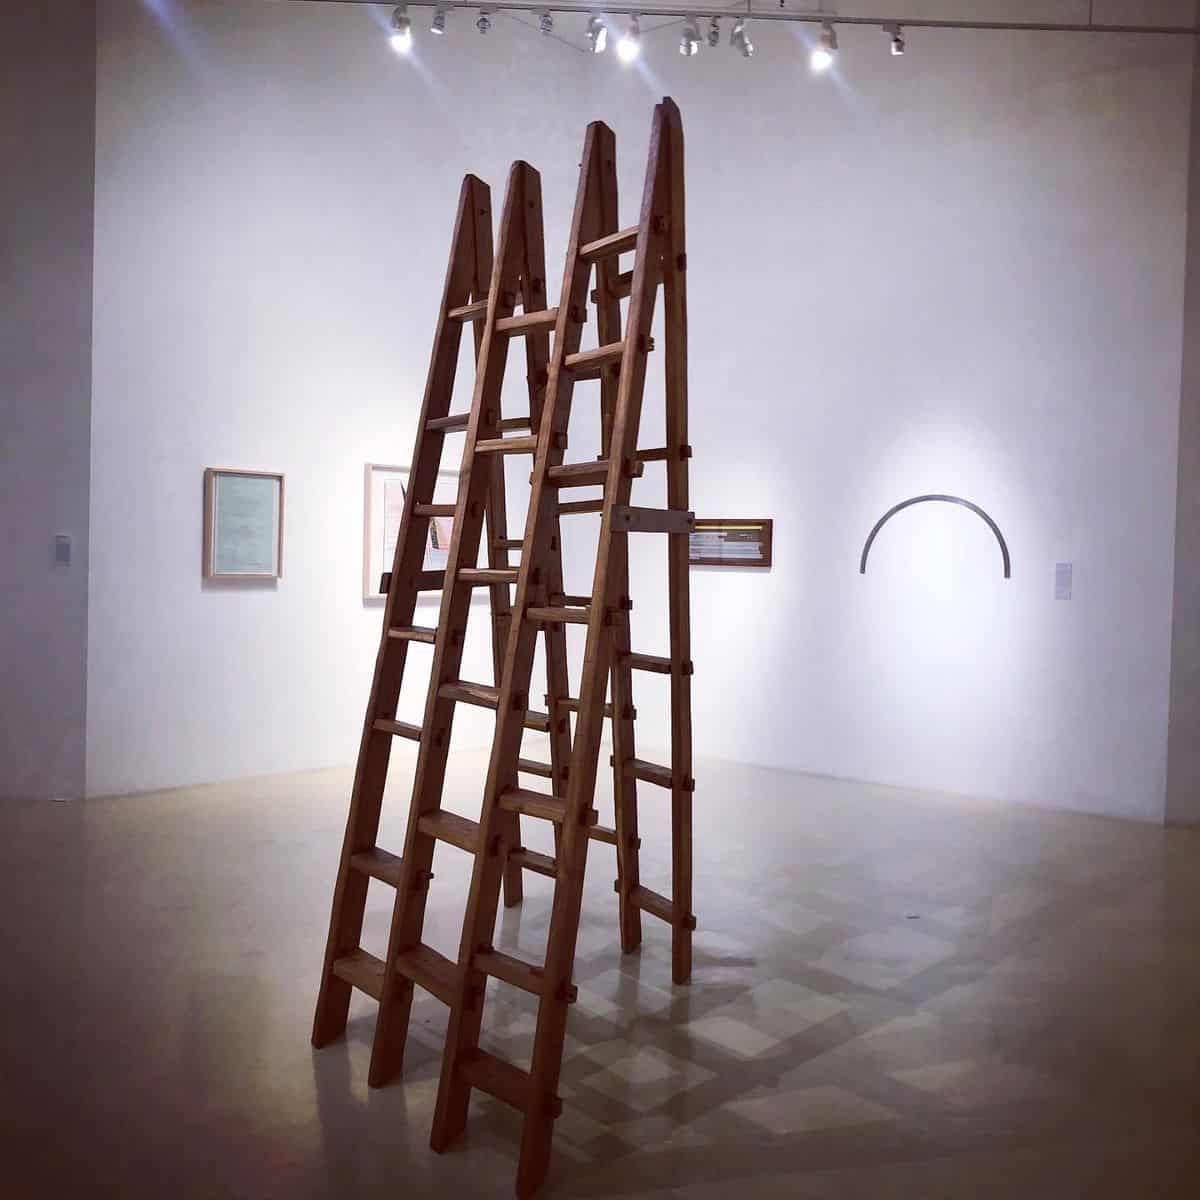 Featuring 2 ladders placed in a way that challenges perception